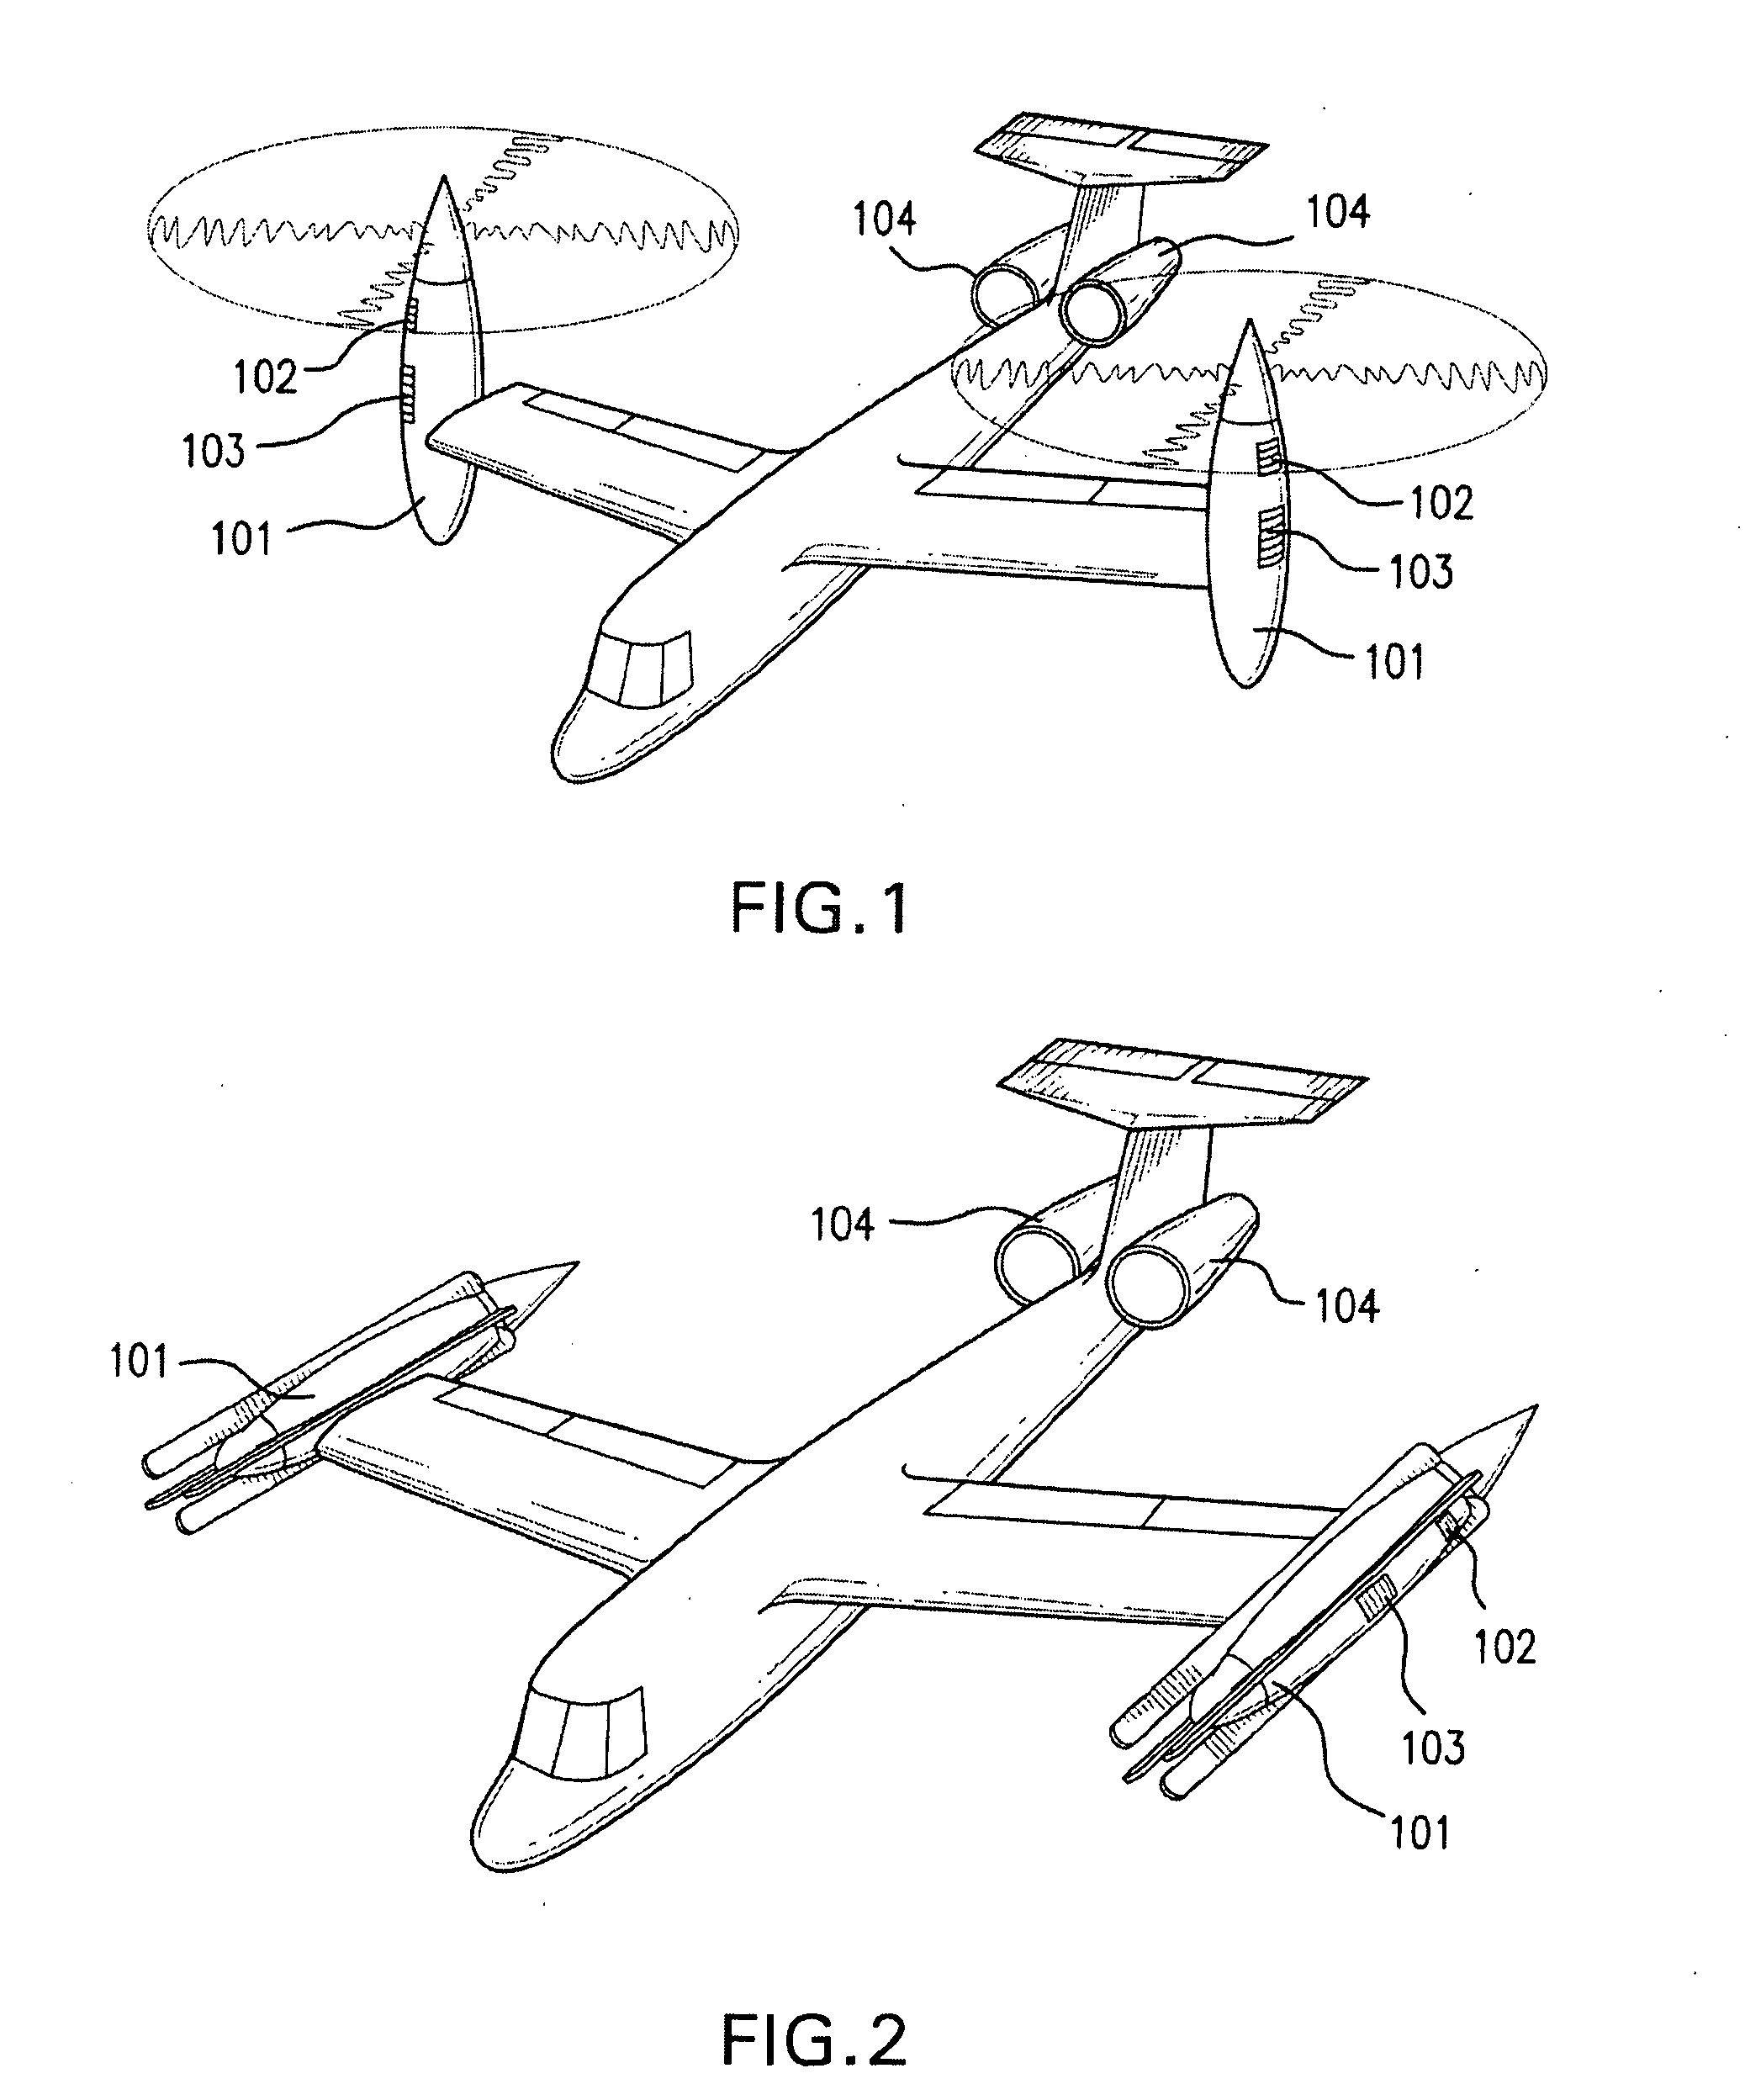 Forward (Upstream) Folding Rotor for a Vertical or Short Take-Off and Landing (V/STOL) Aircraft